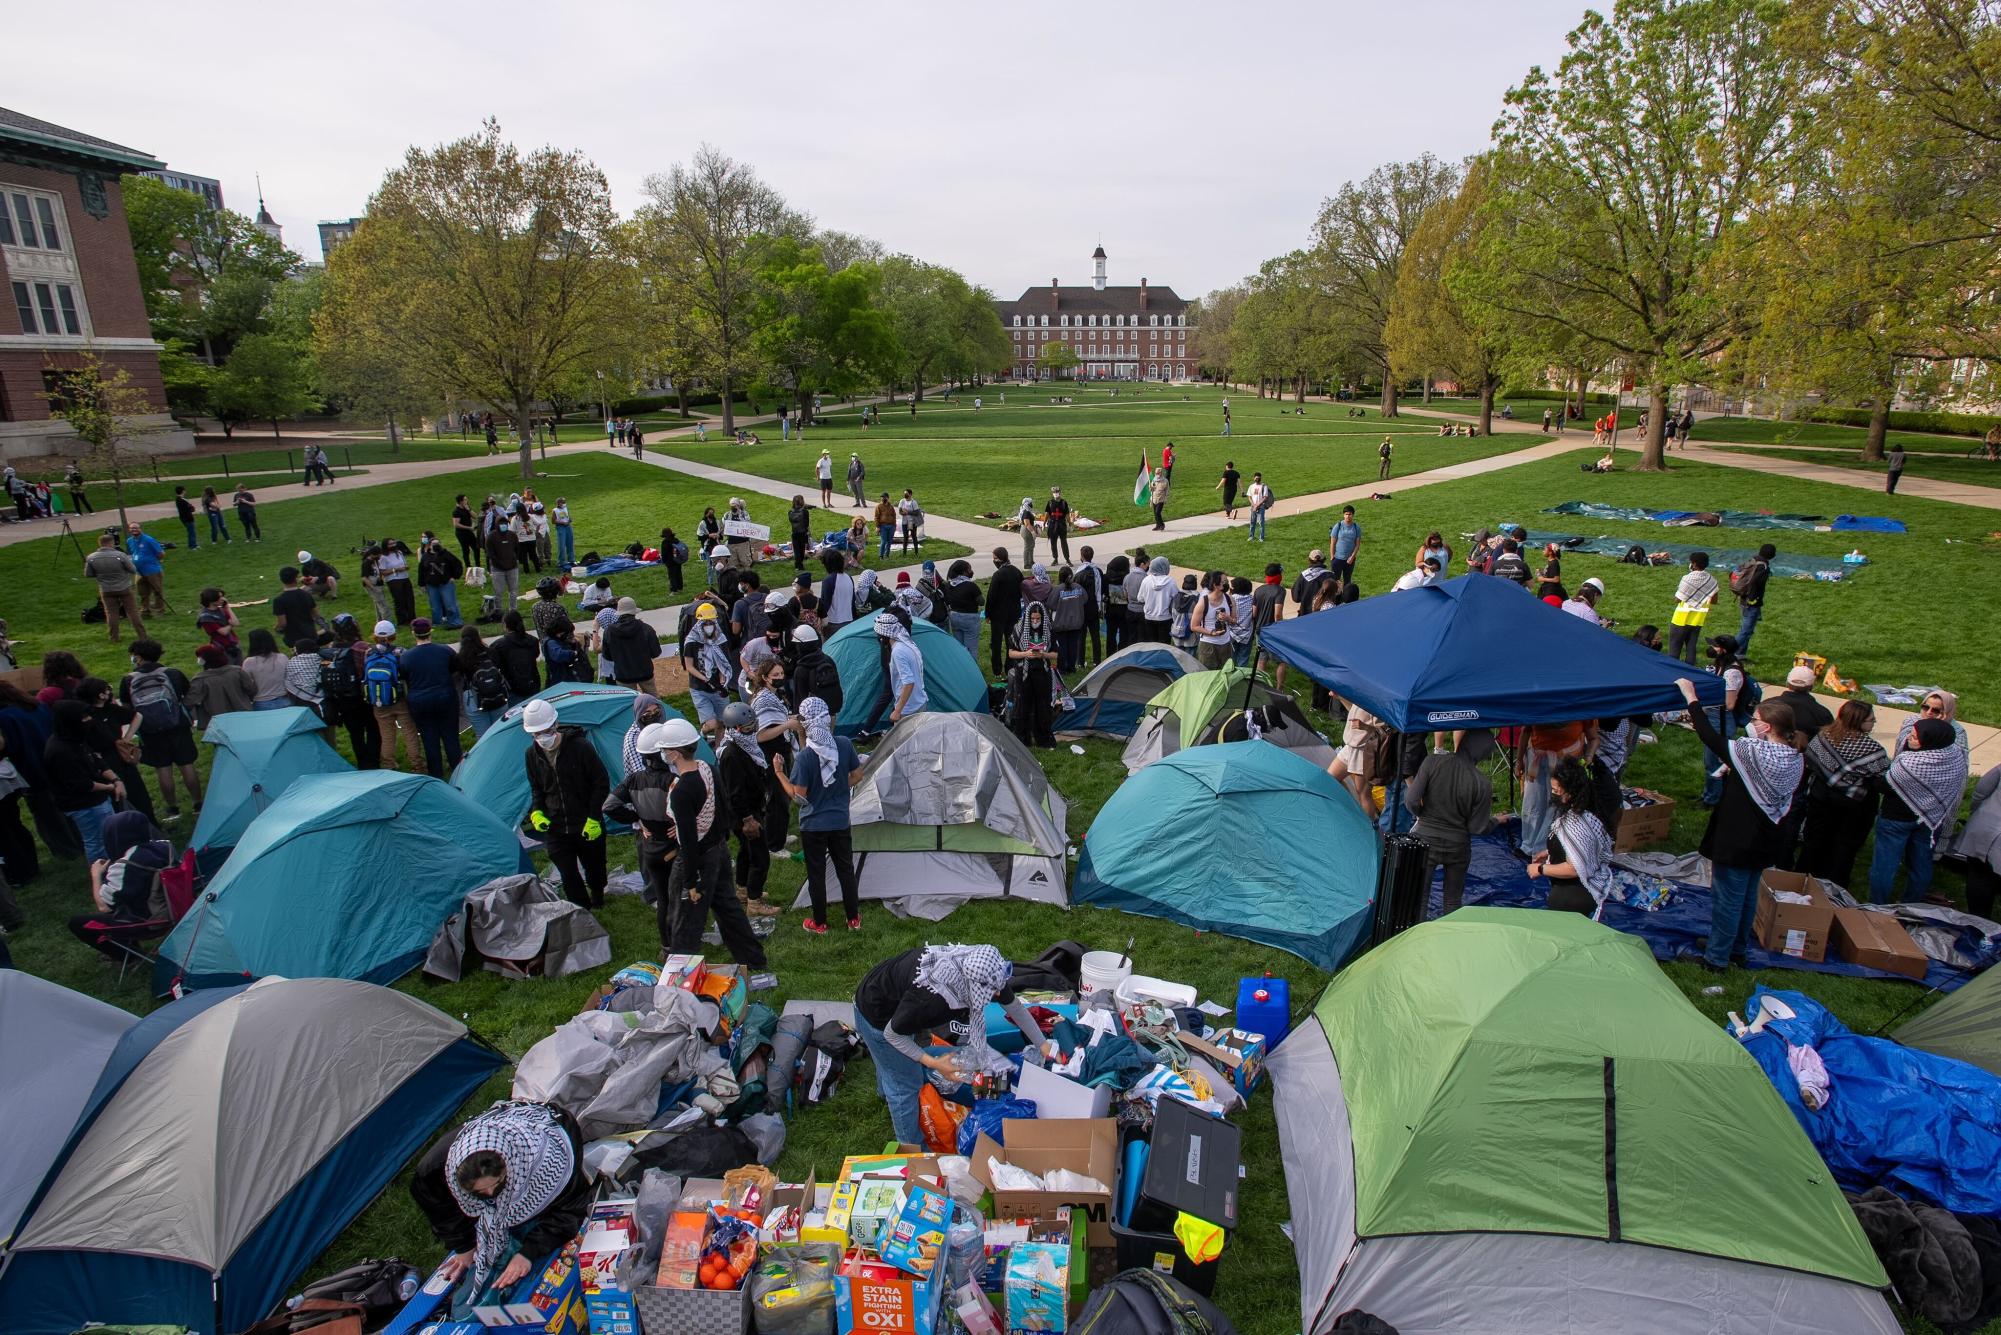 Tents begin to get assembled on the Main Quad. Protesters were informed that they are within their rights to protest on the Main Quad, however structures are not allowed to be erected.